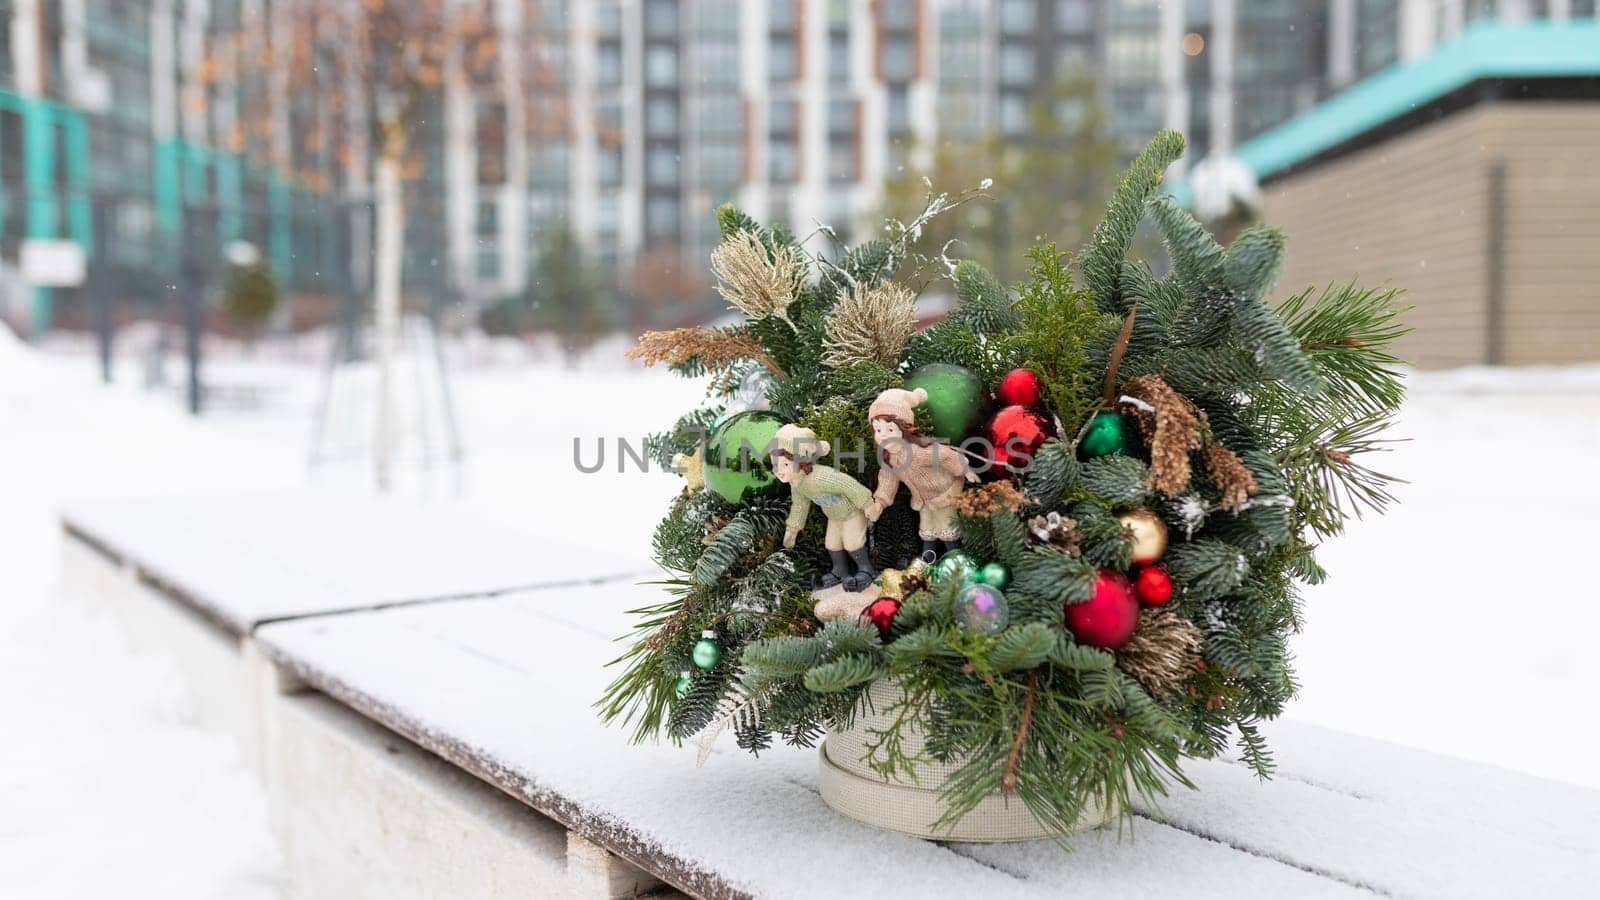 A potted plant adorned with Christmas decorations sits on a ledge. The decorations include ornaments, lights, and ribbons, adding festive cheer to the setting. The plant looks healthy and vibrant against the backdrop of the ledge.